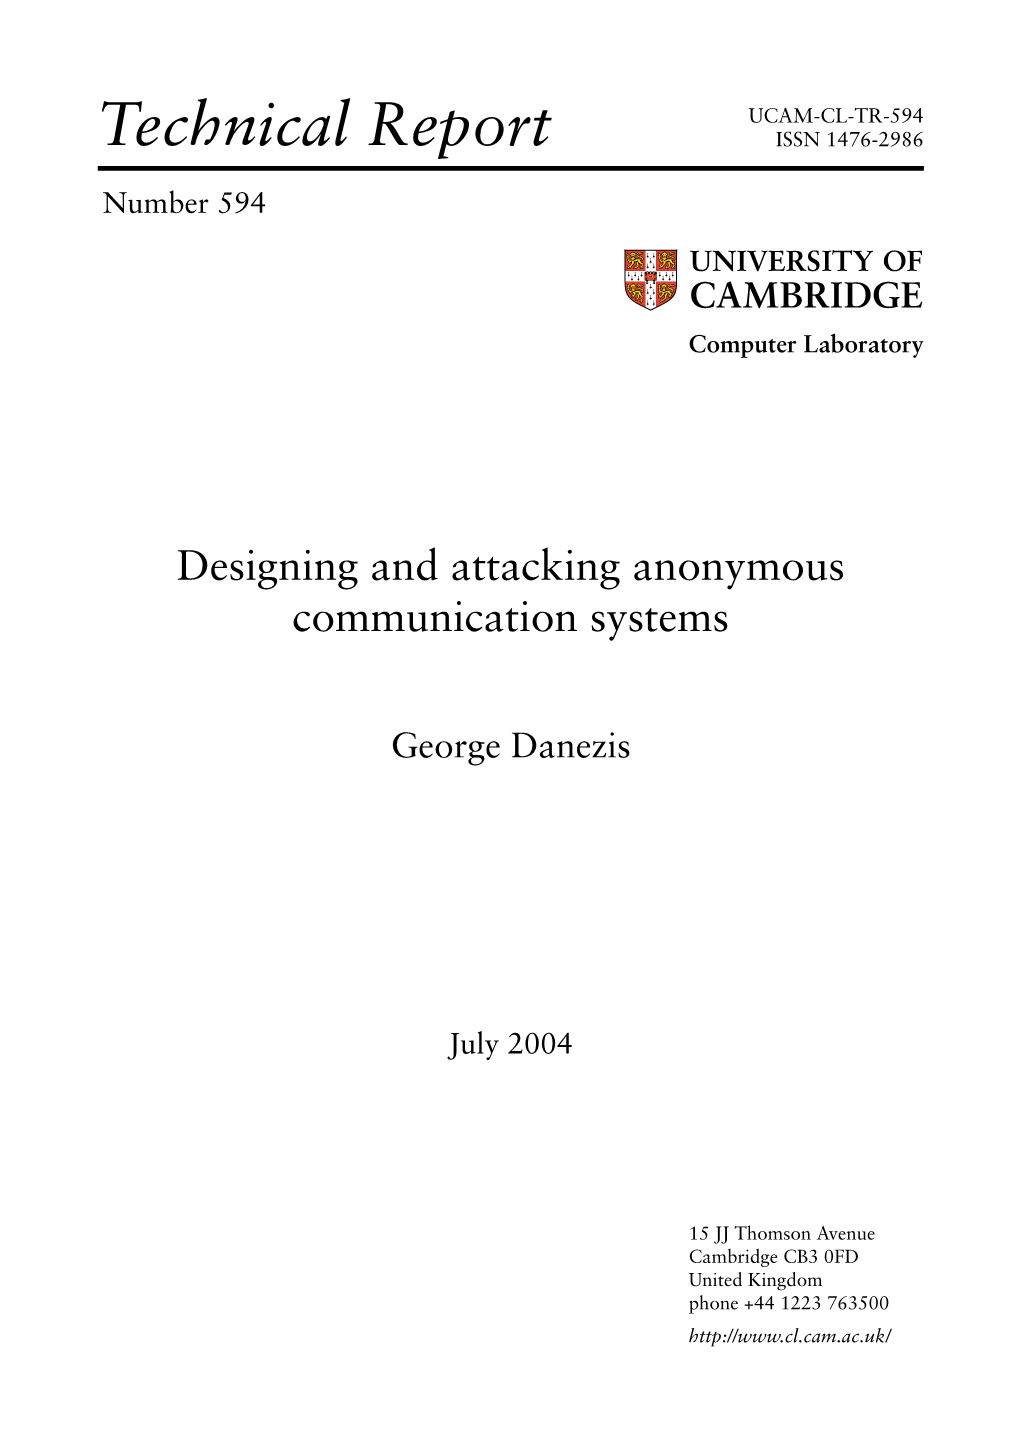 Designing and Attacking Anonymous Communication Systems